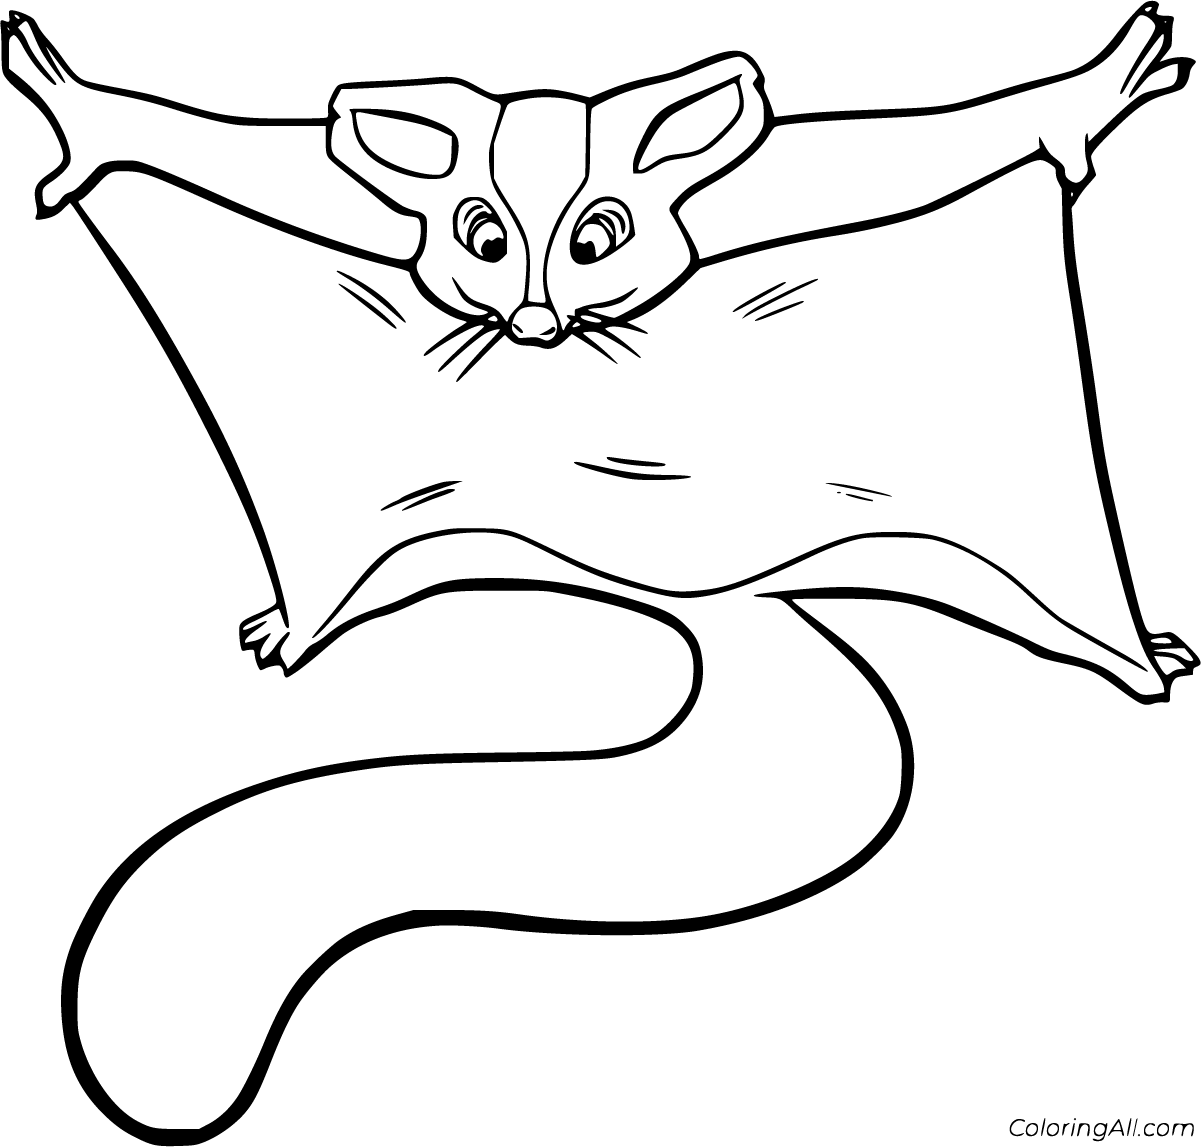 Sugar Glider Coloring Pages - ColoringAll